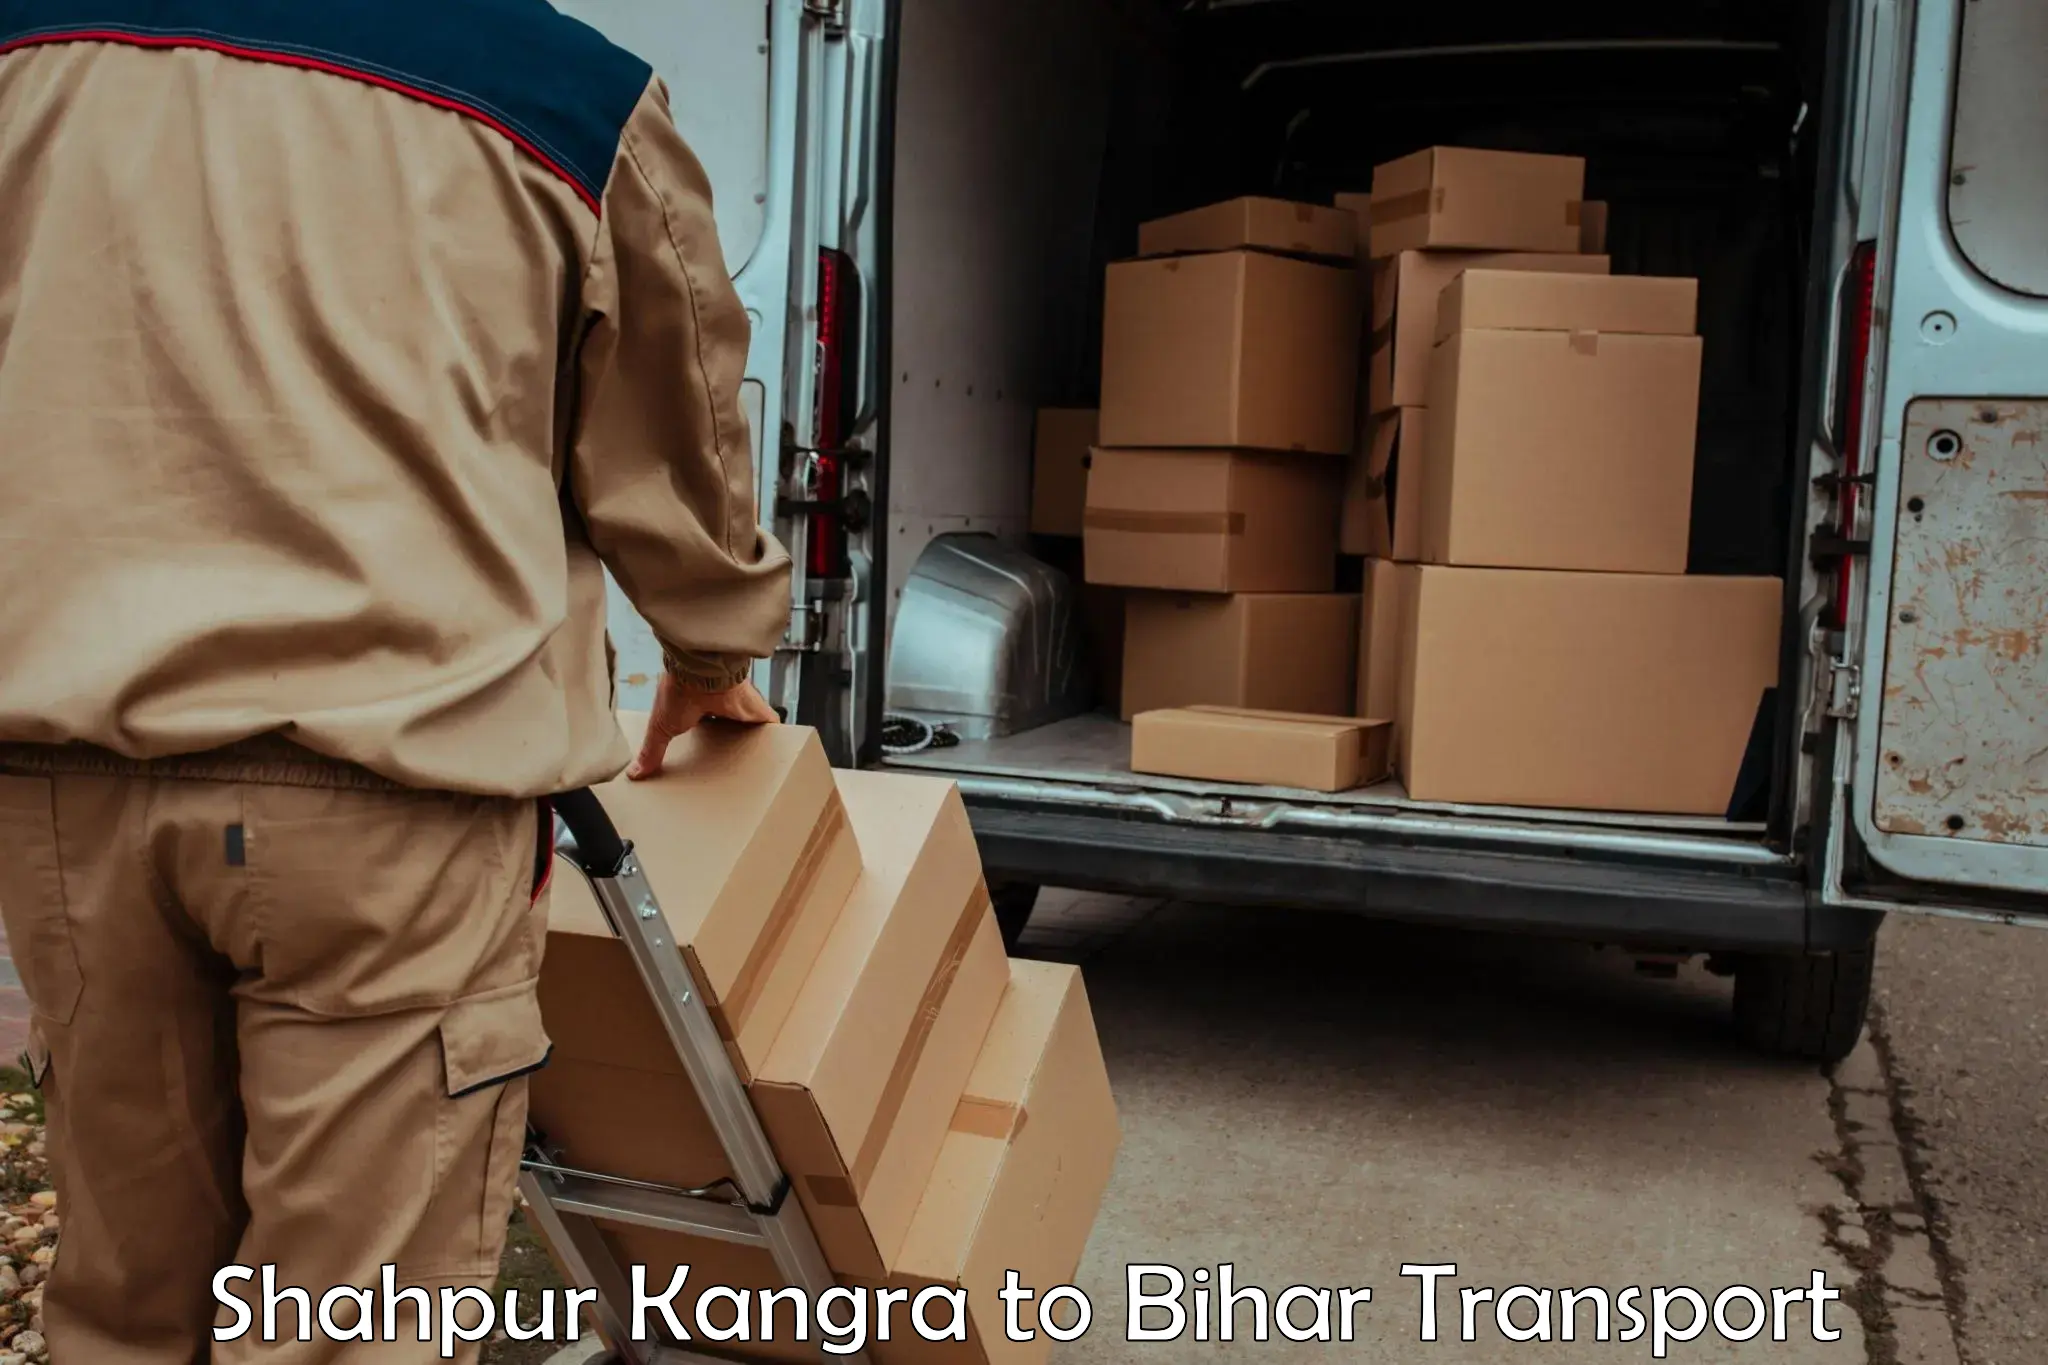 Transport bike from one state to another Shahpur Kangra to Ghanshyampur